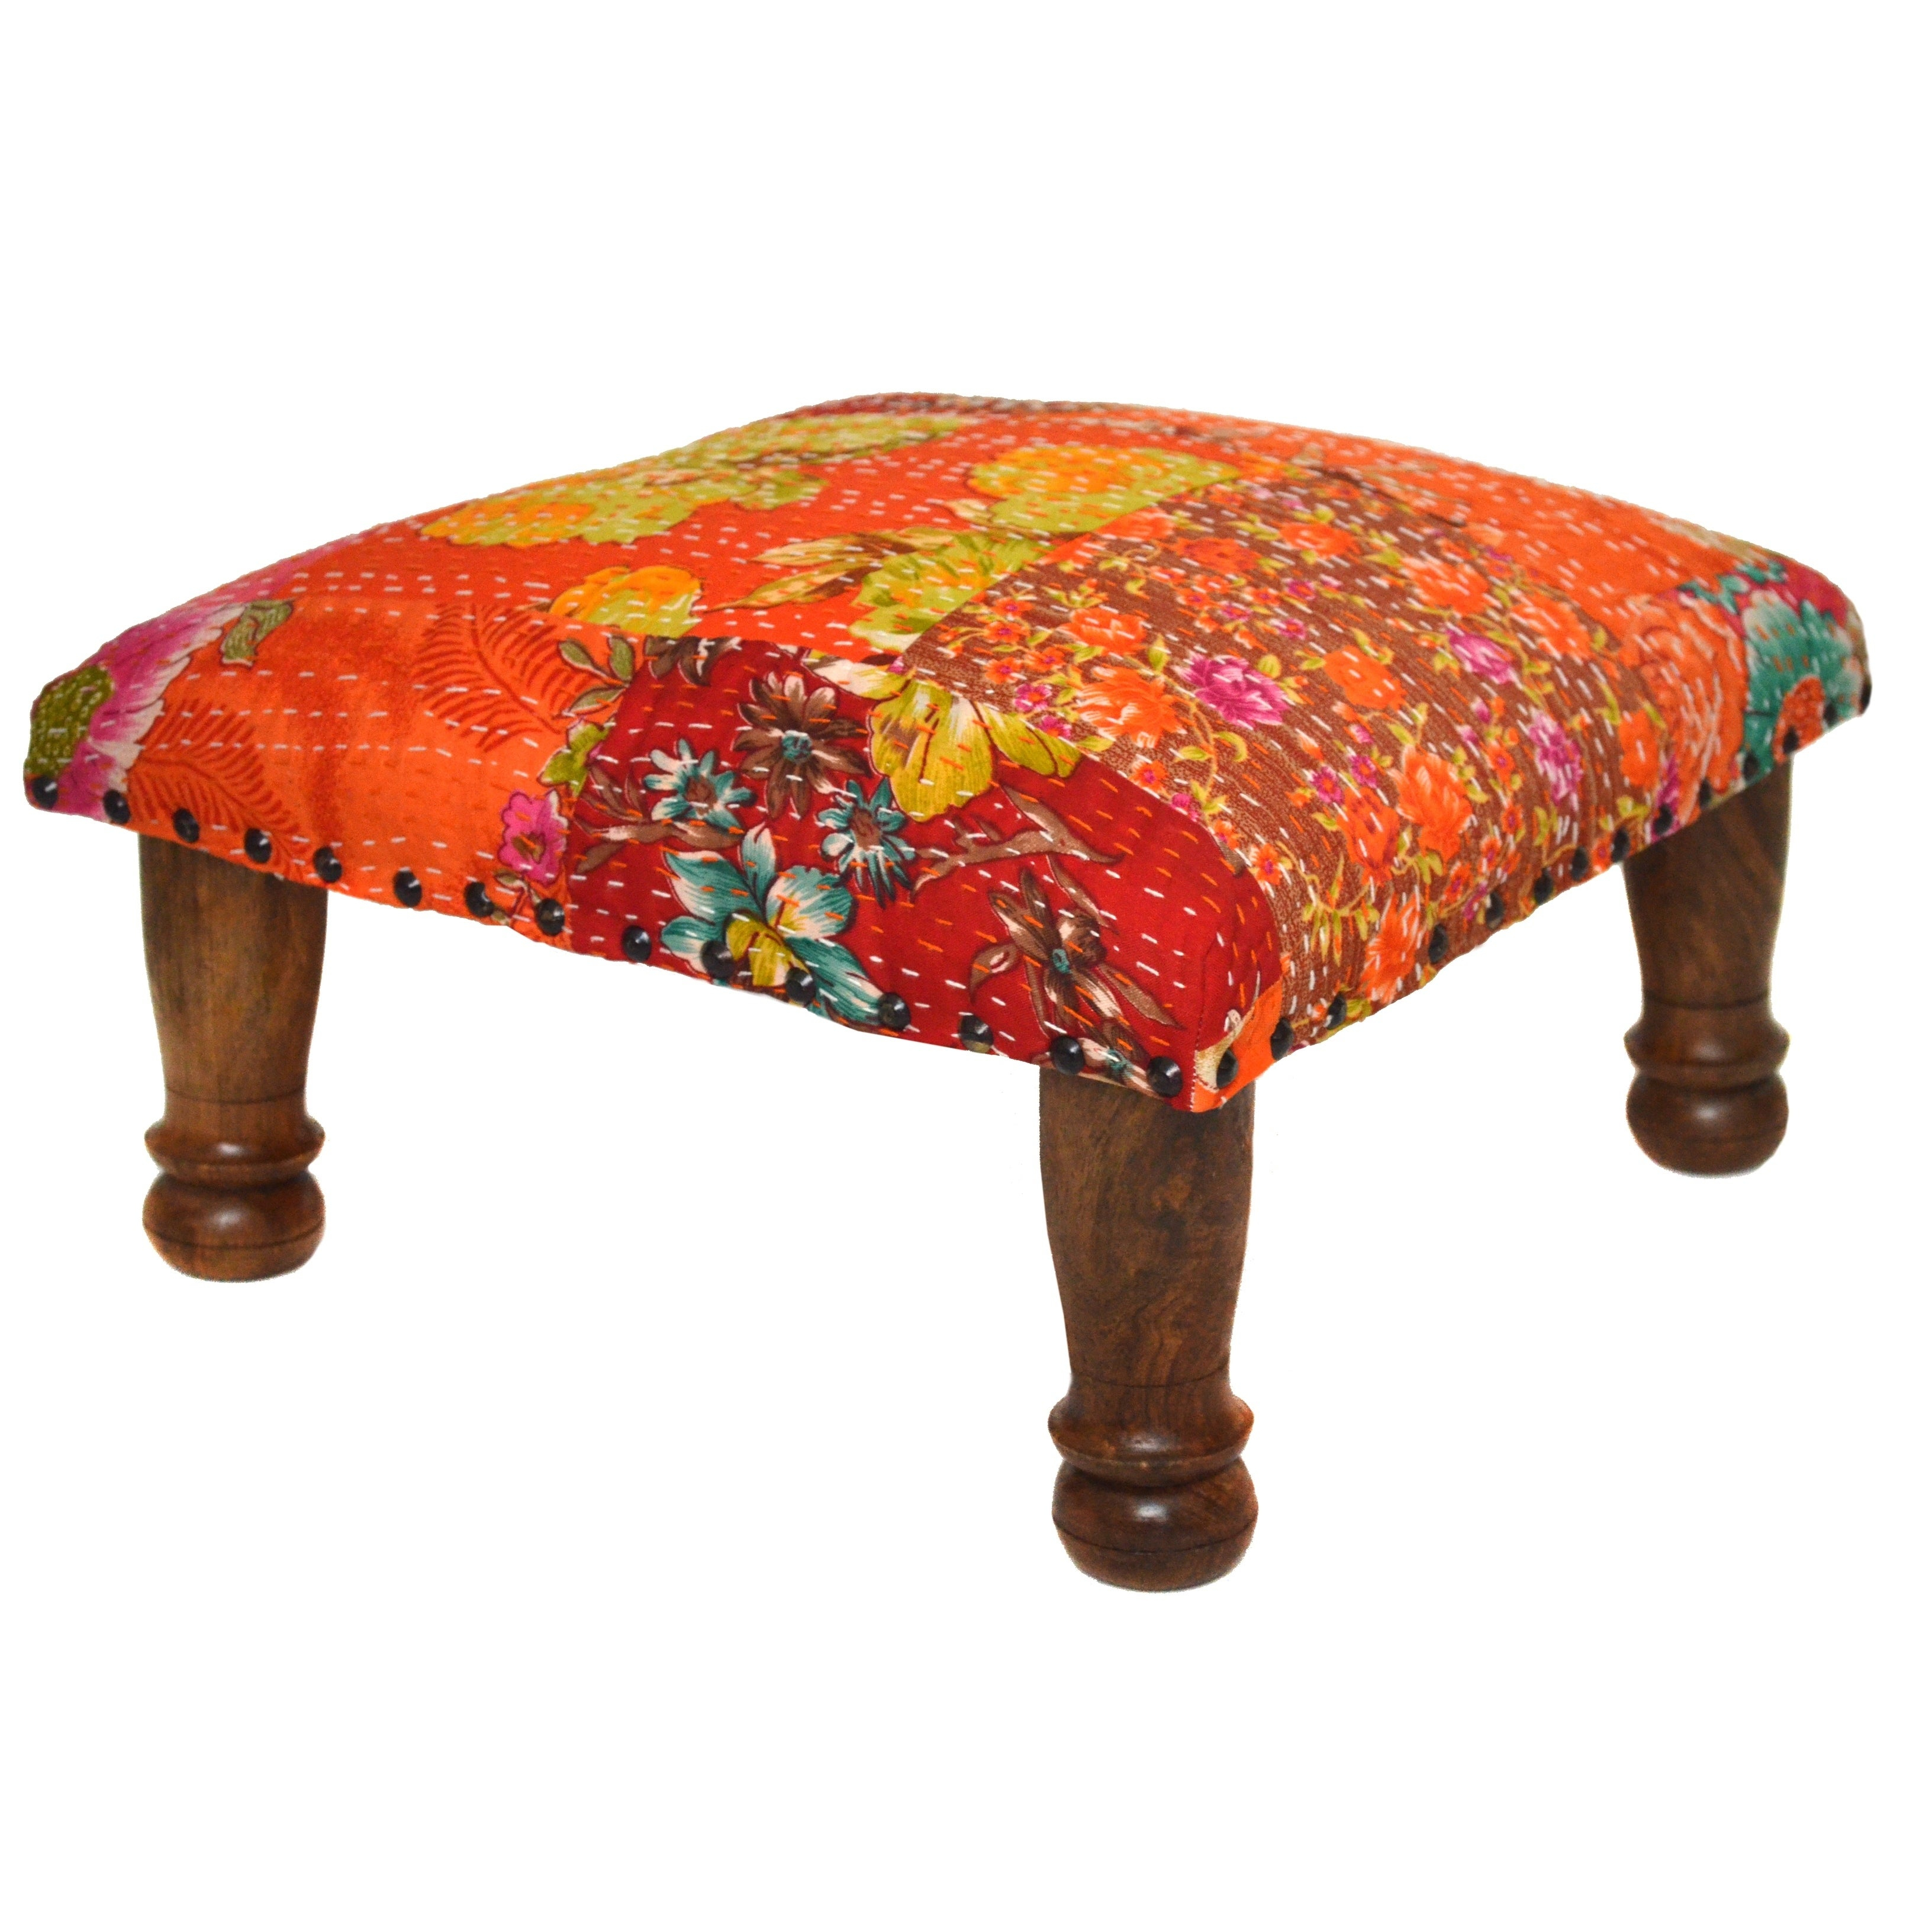 Ottoman Embroidery Patterns Square Embroidered Upholstered Pattern Footstool Ottoman